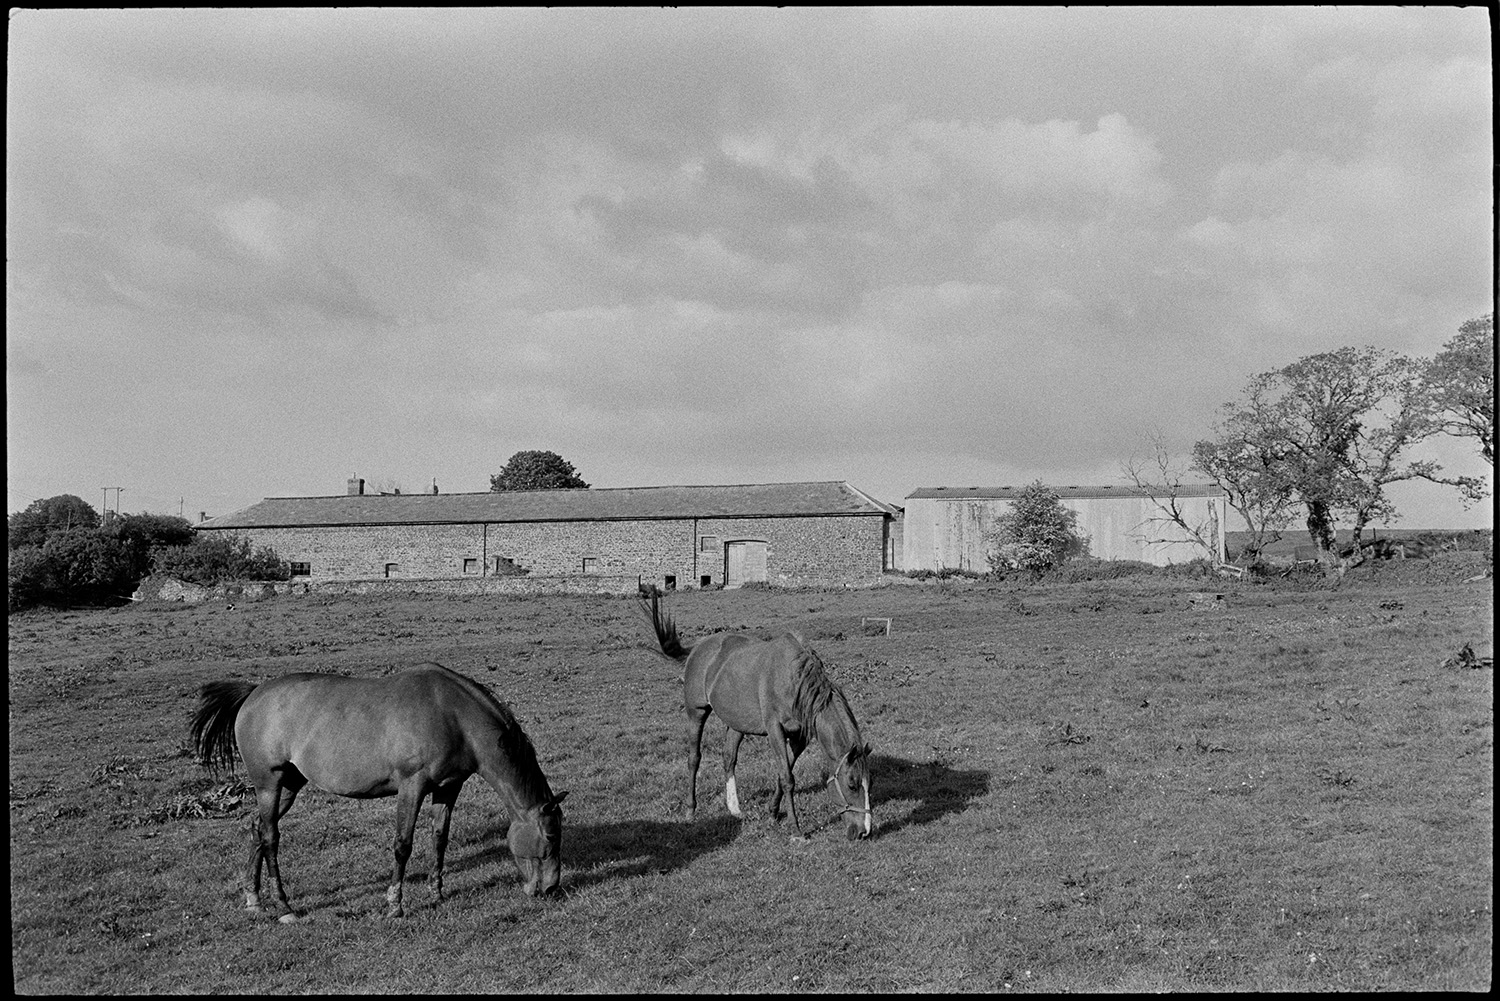 Scenes around village, comparison shots with old photos.
[Two horses in a field at High Bickington. Barns and farm building are visible in the background.]